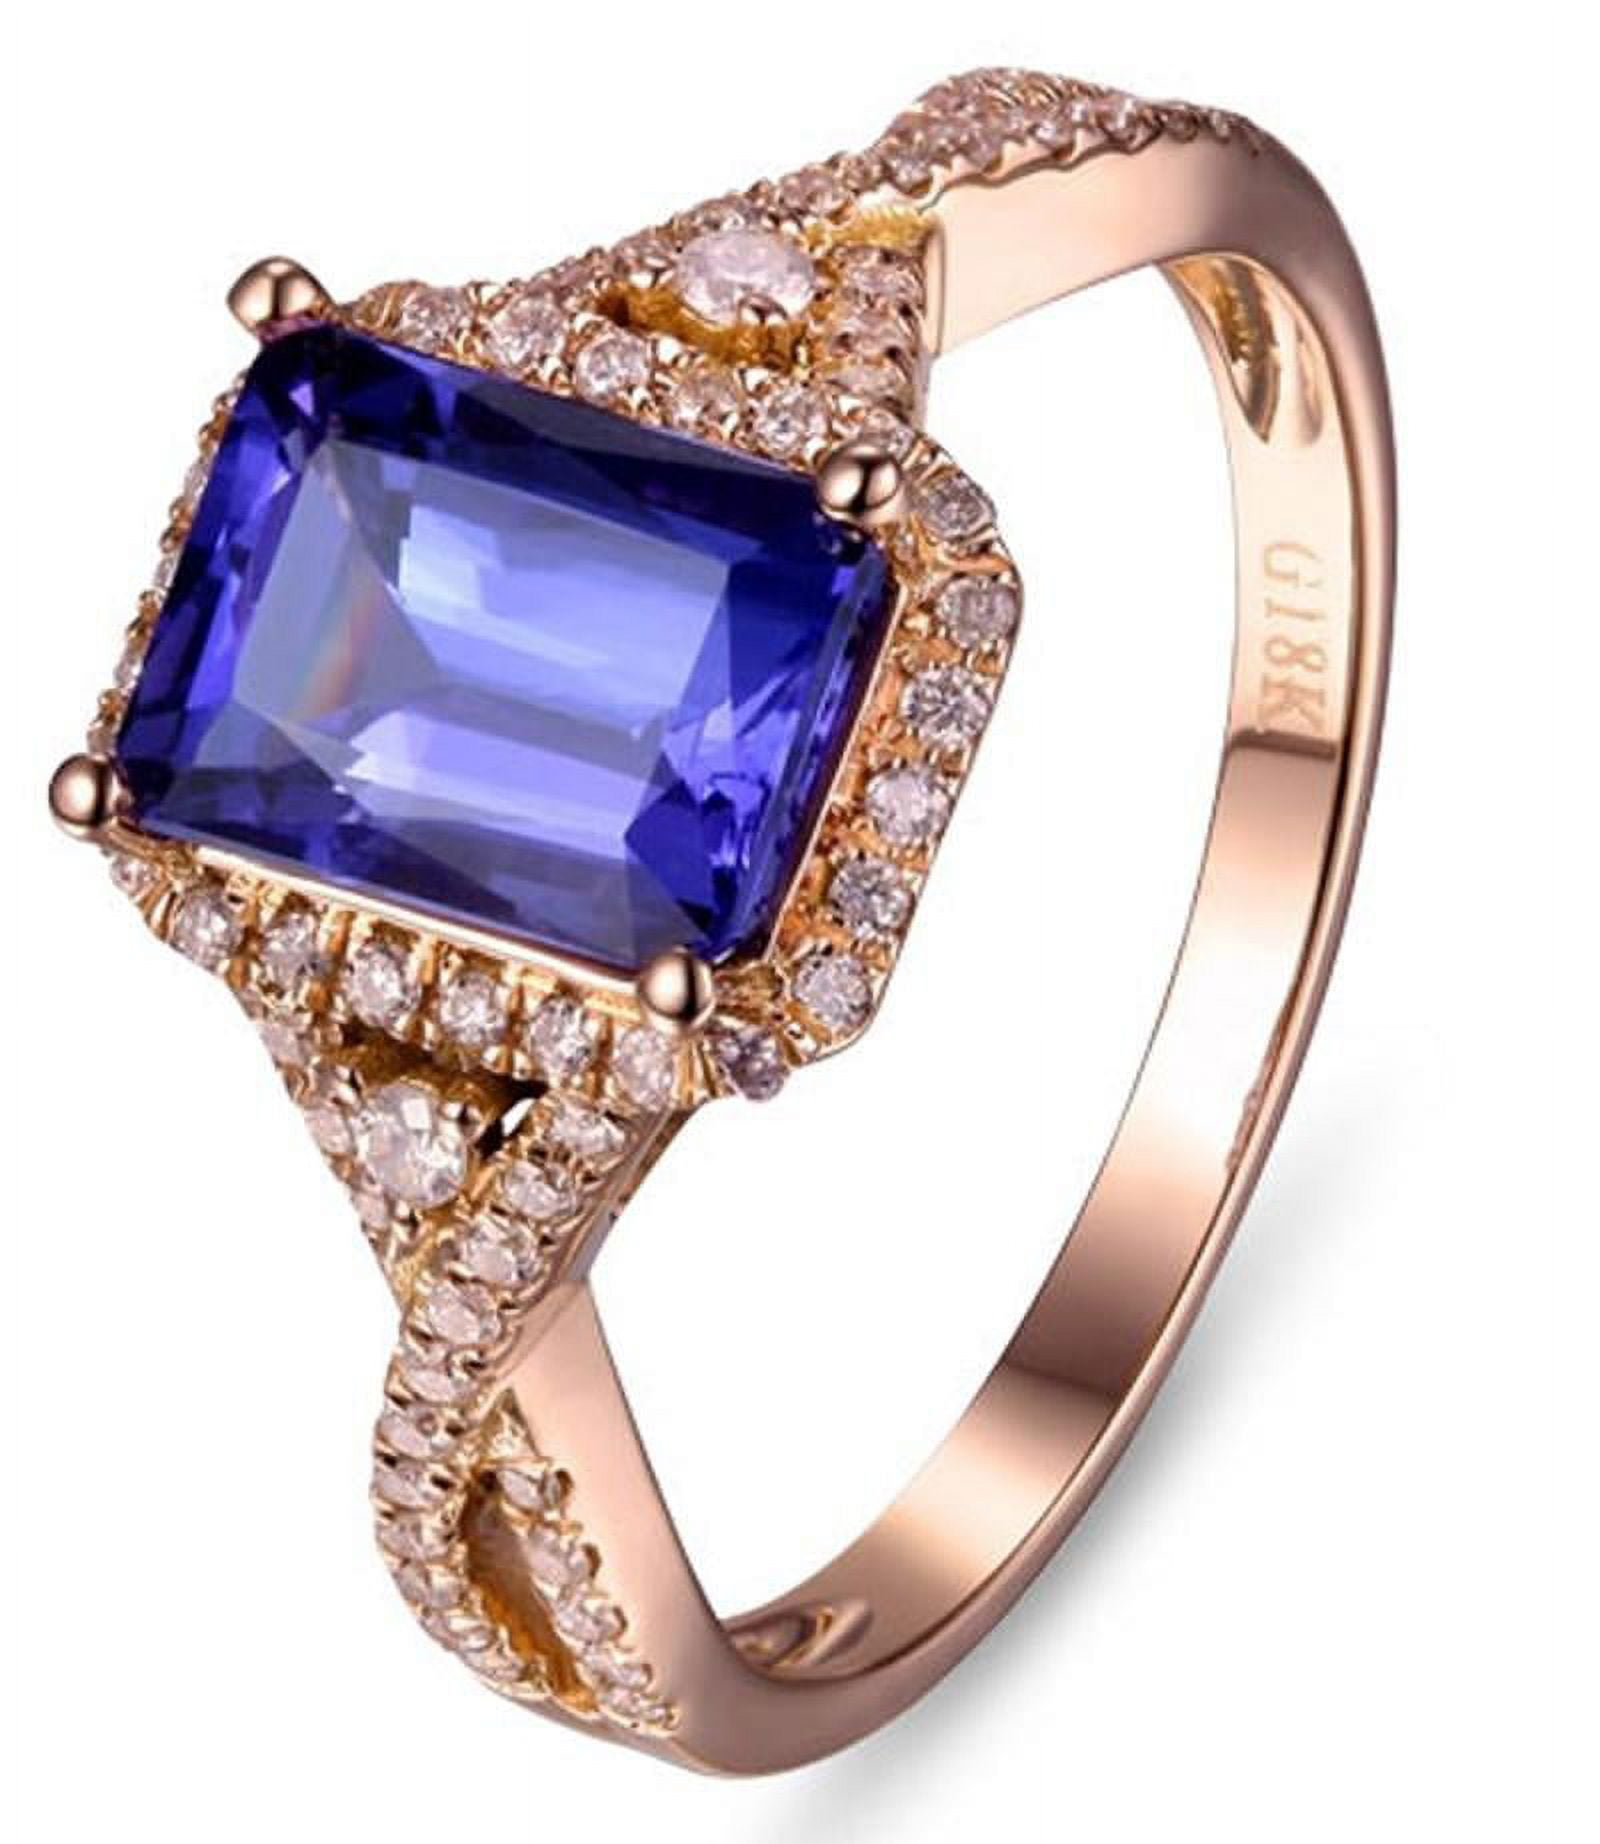 Incredibly Beautiful Engagement Rings in 2020 - Peach Sapphire with white  diamonds